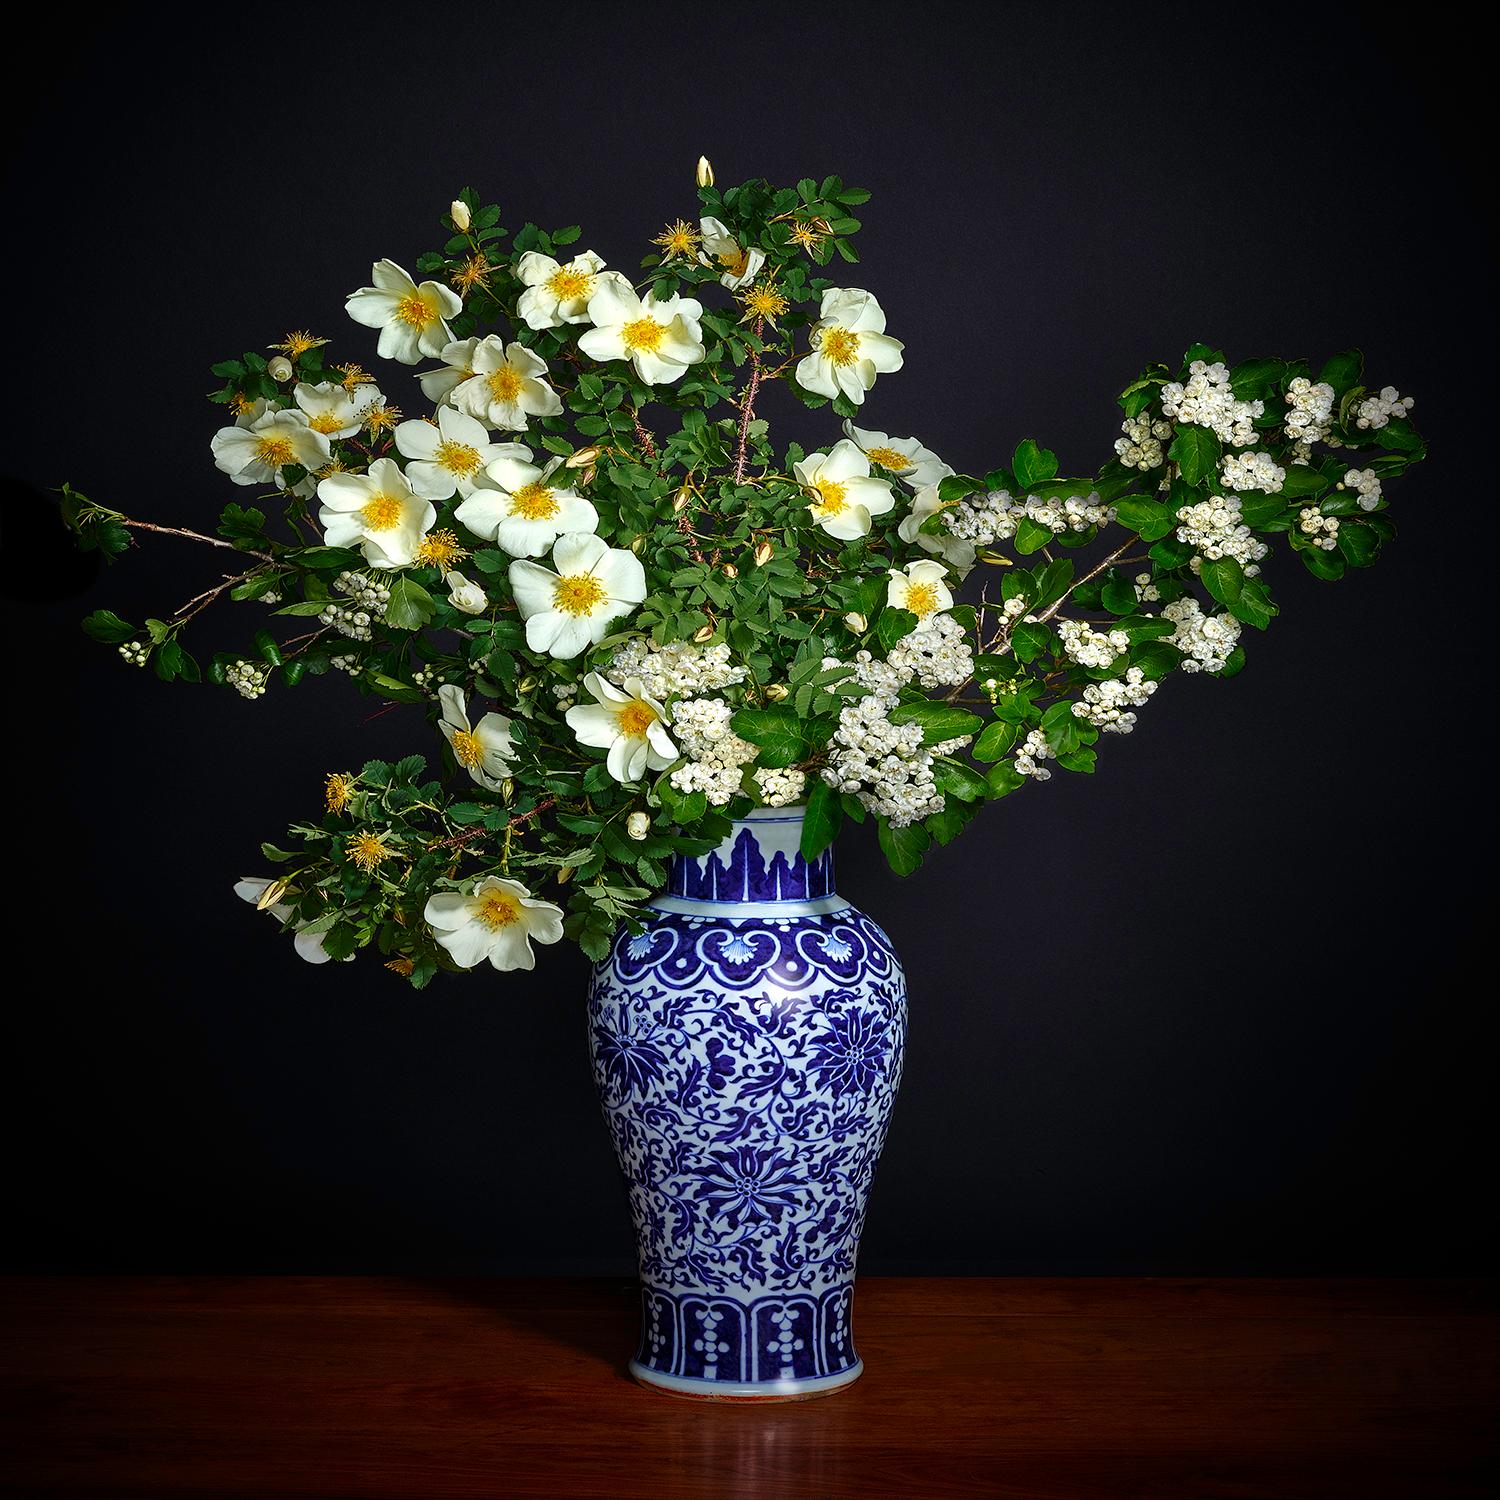 T.M. Glass Color Photograph - White Hawthorne & White Shrub Rose in a Blue and White Chinese Vase